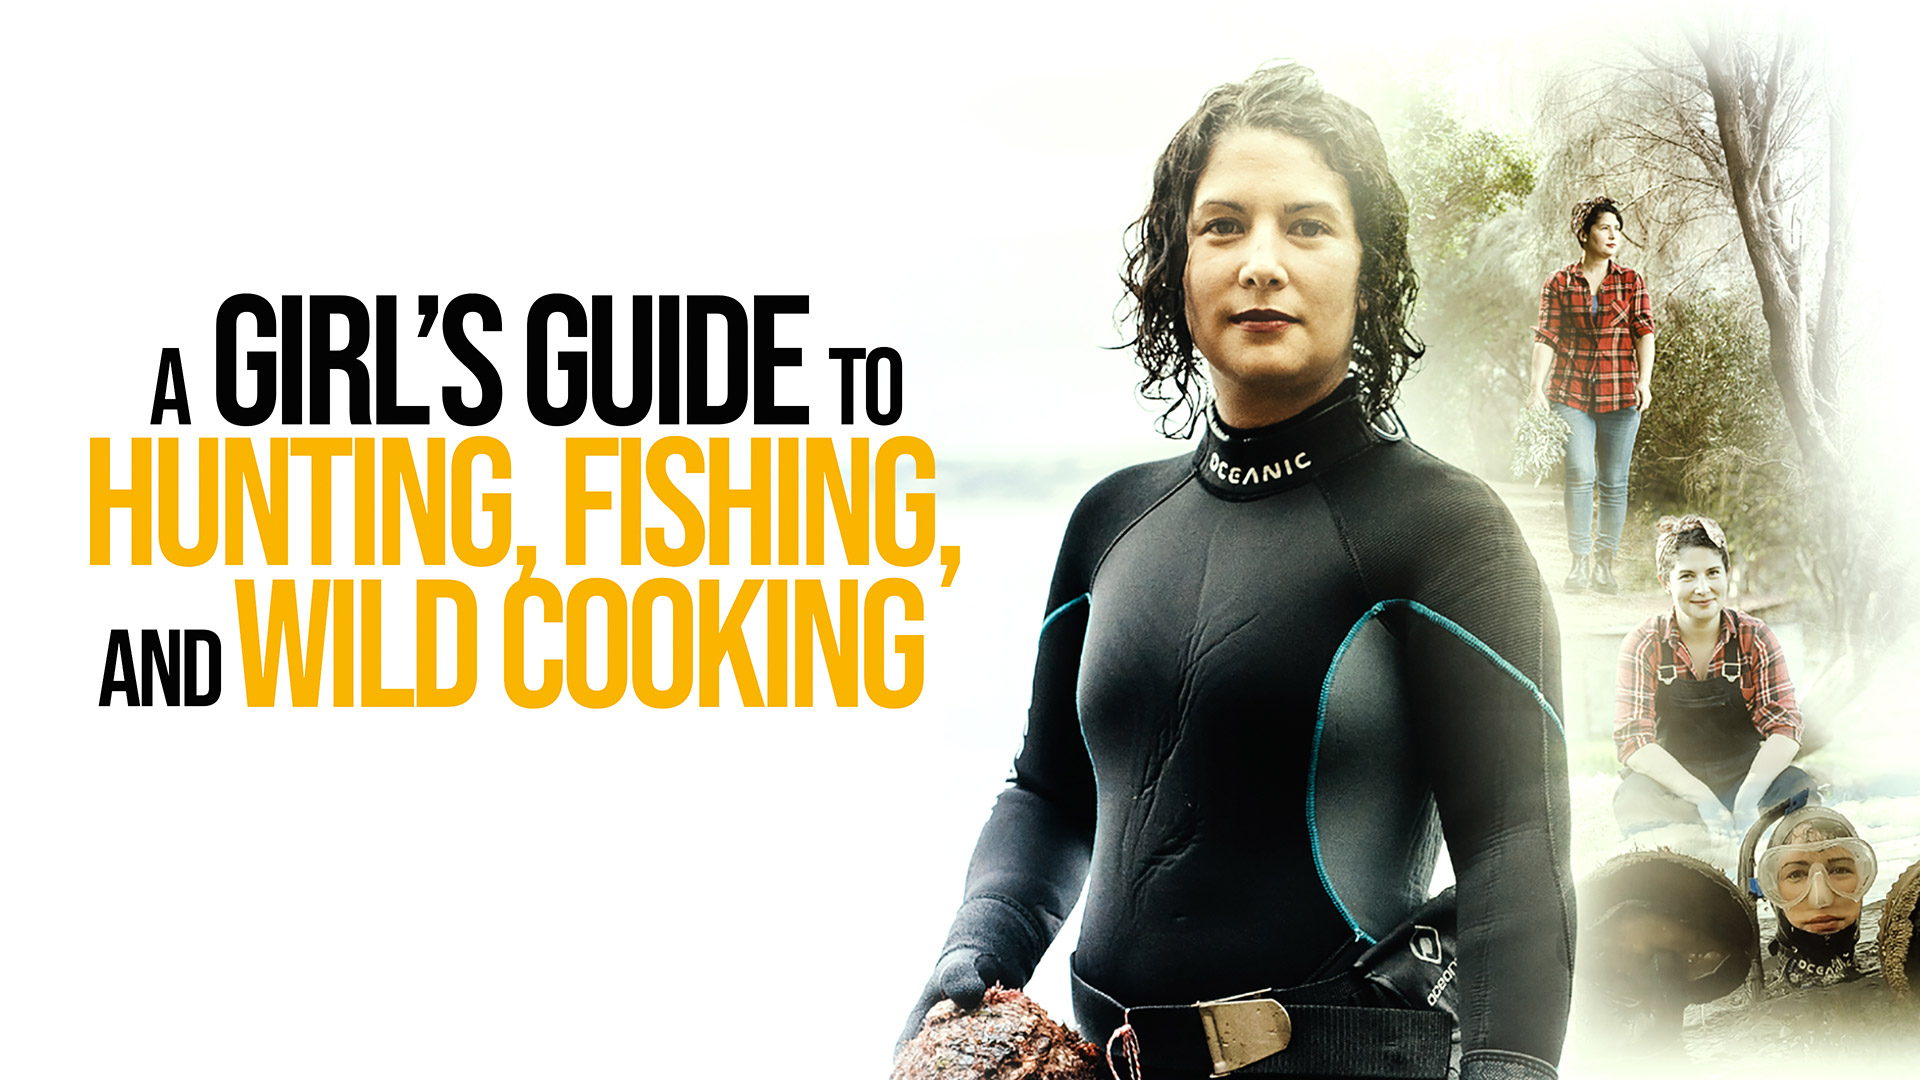 A Girl’s Guide to Hunting, Fishing & Wild Cooking